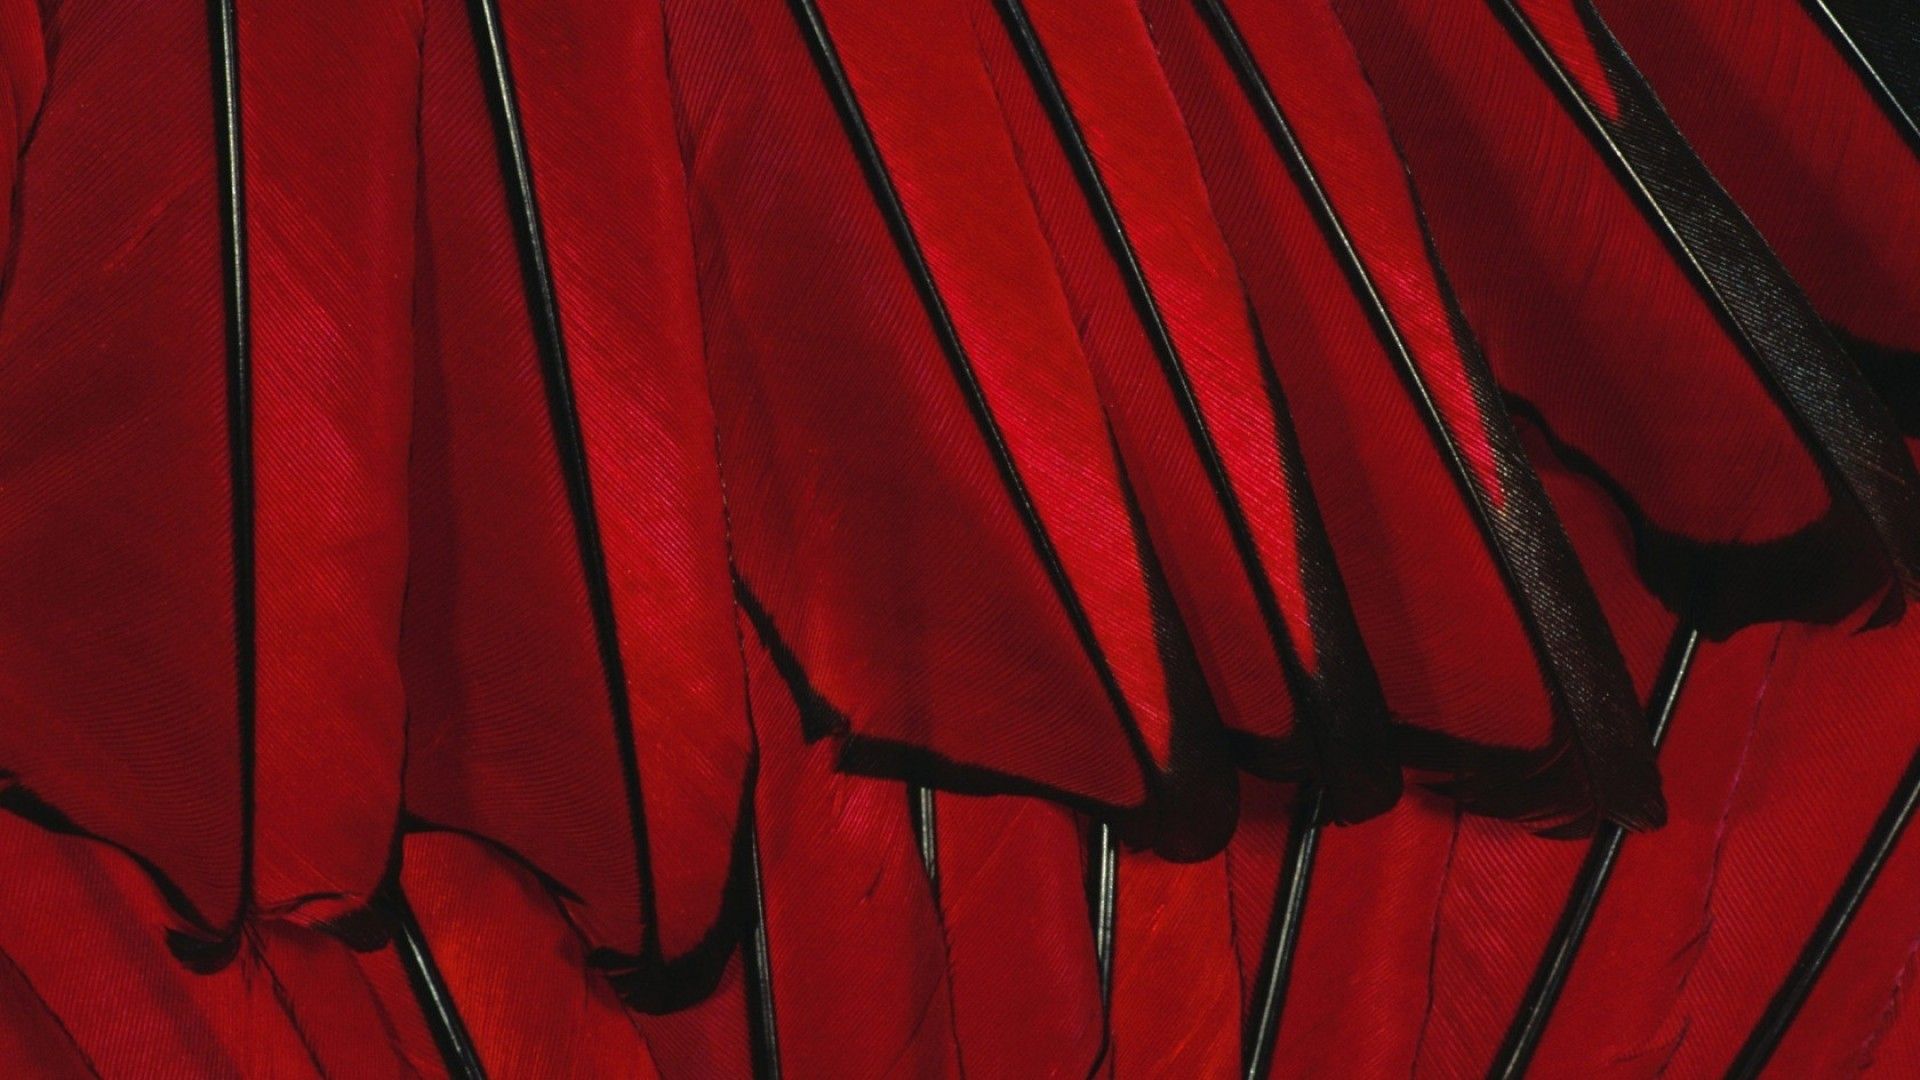 A close up of a red and black feathered wing. - Dark red